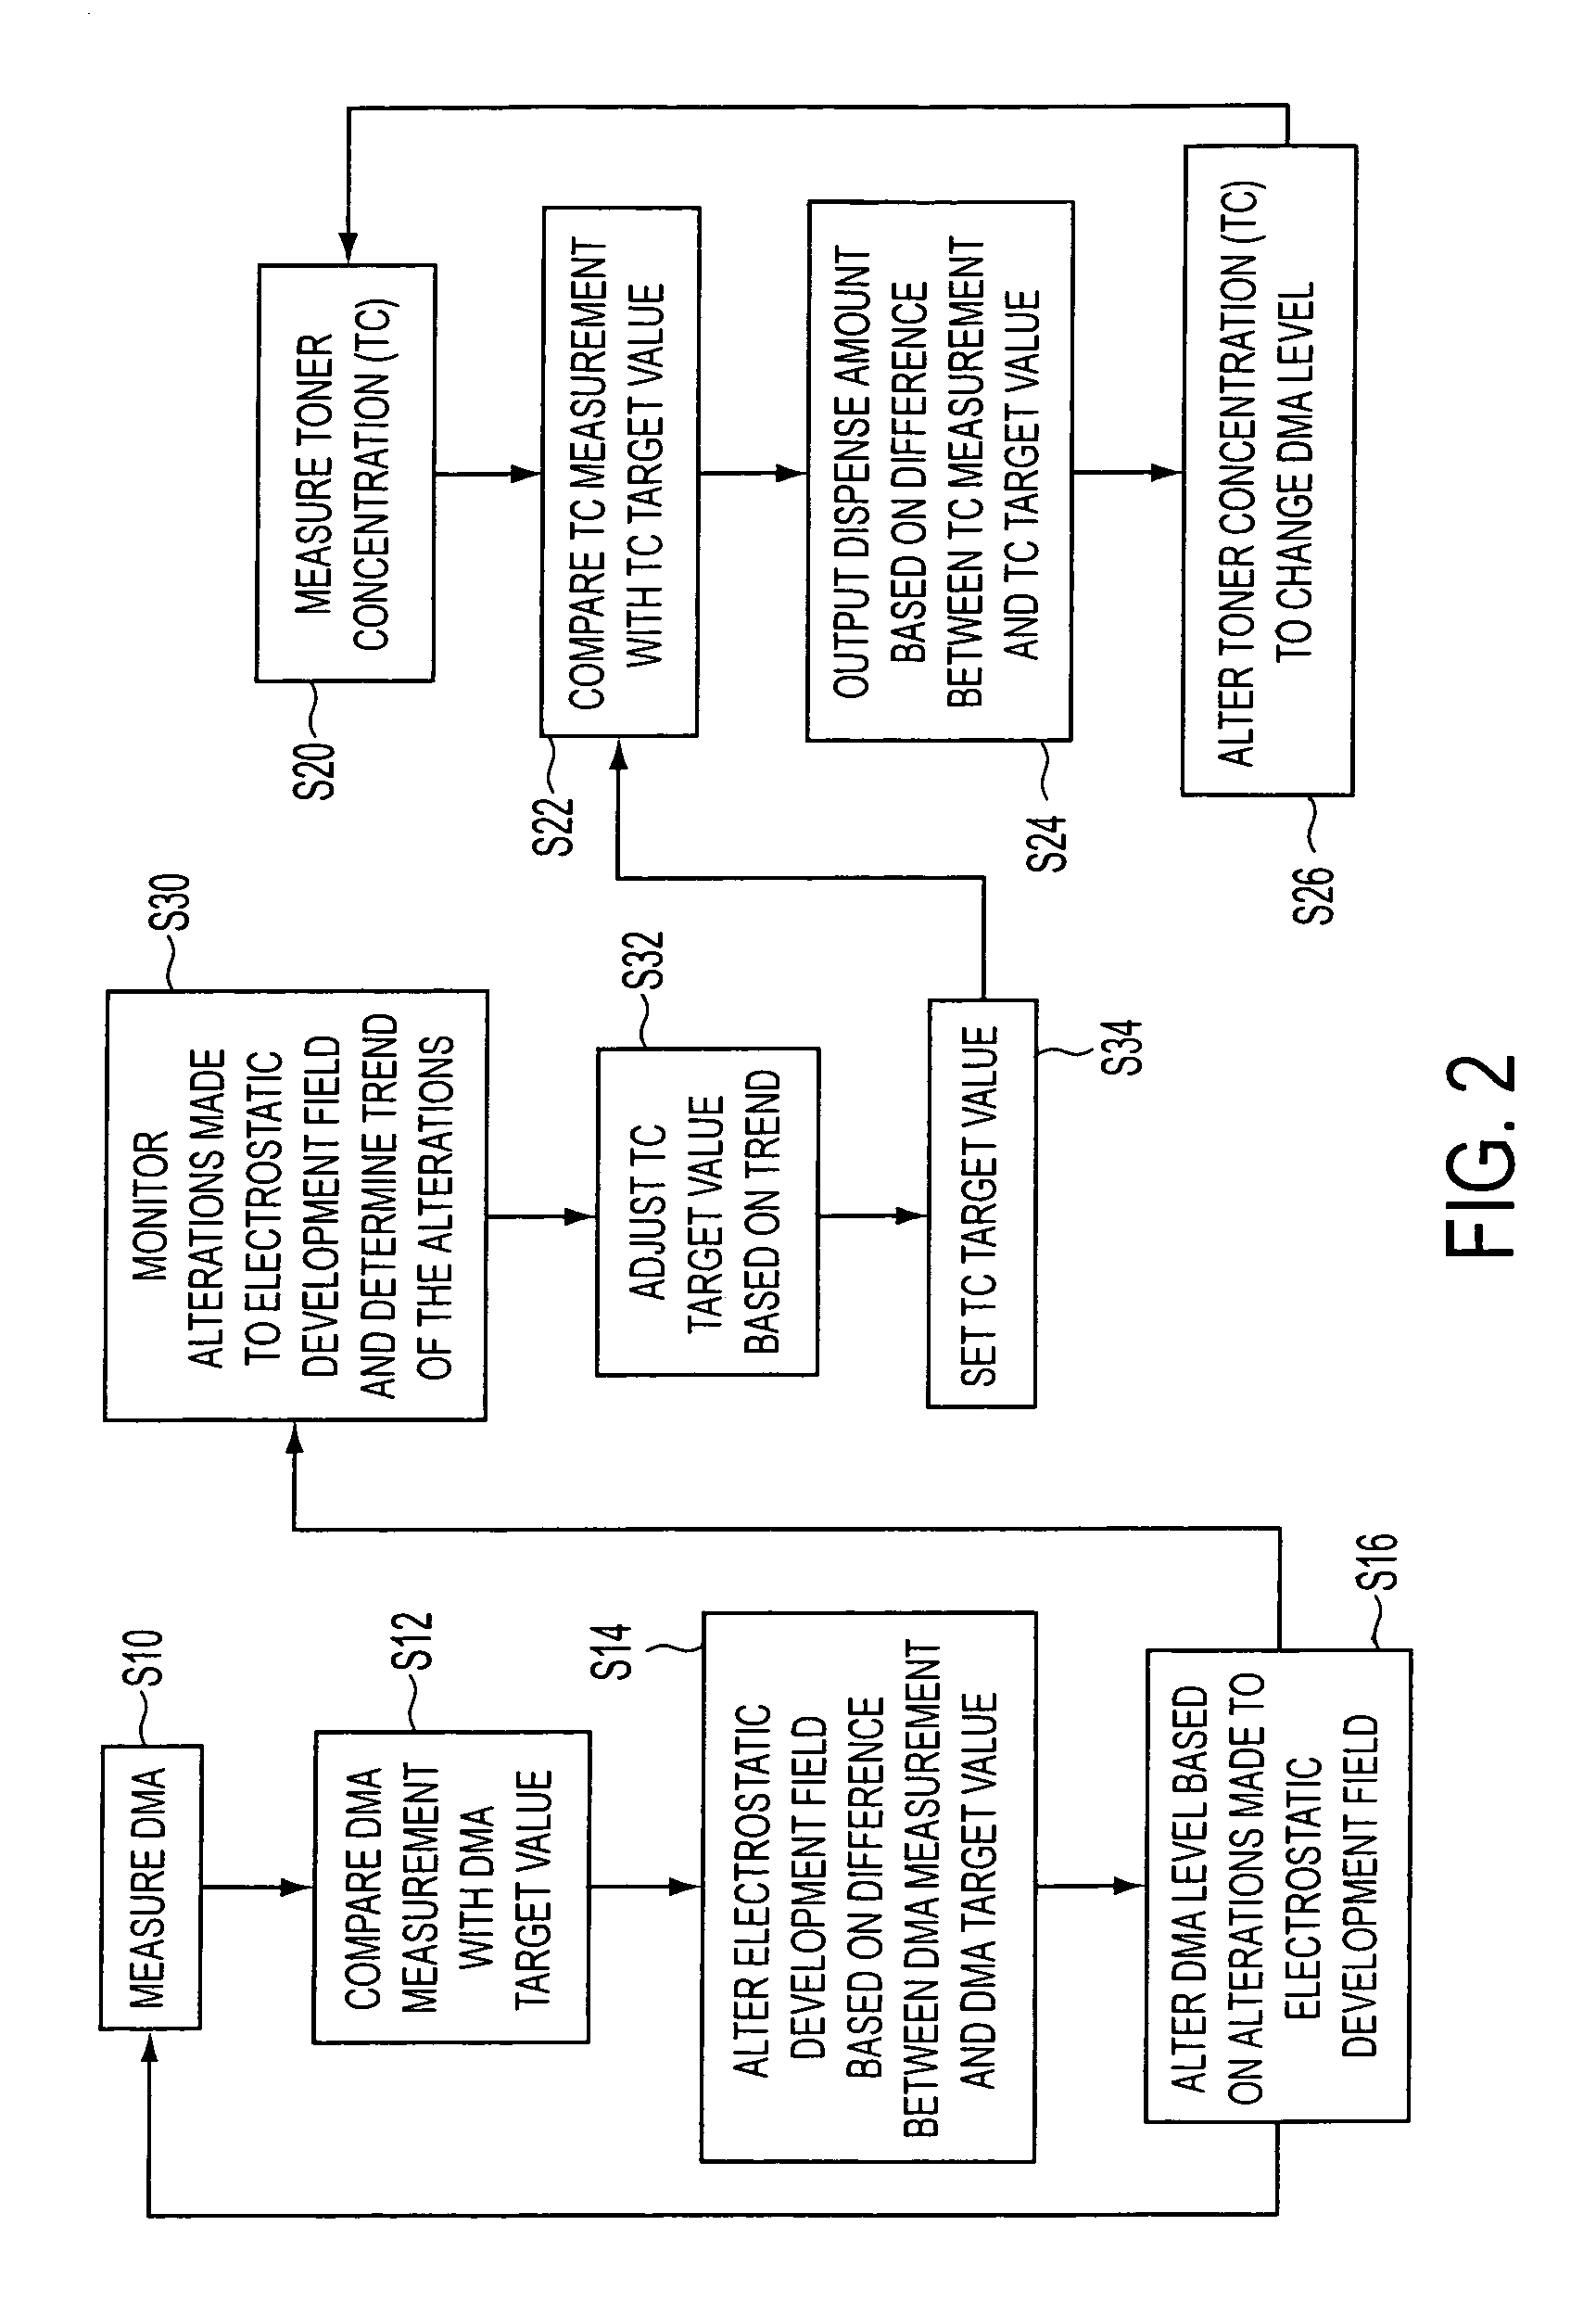 System for active toner concentration target adjustments and method to maintain development performance